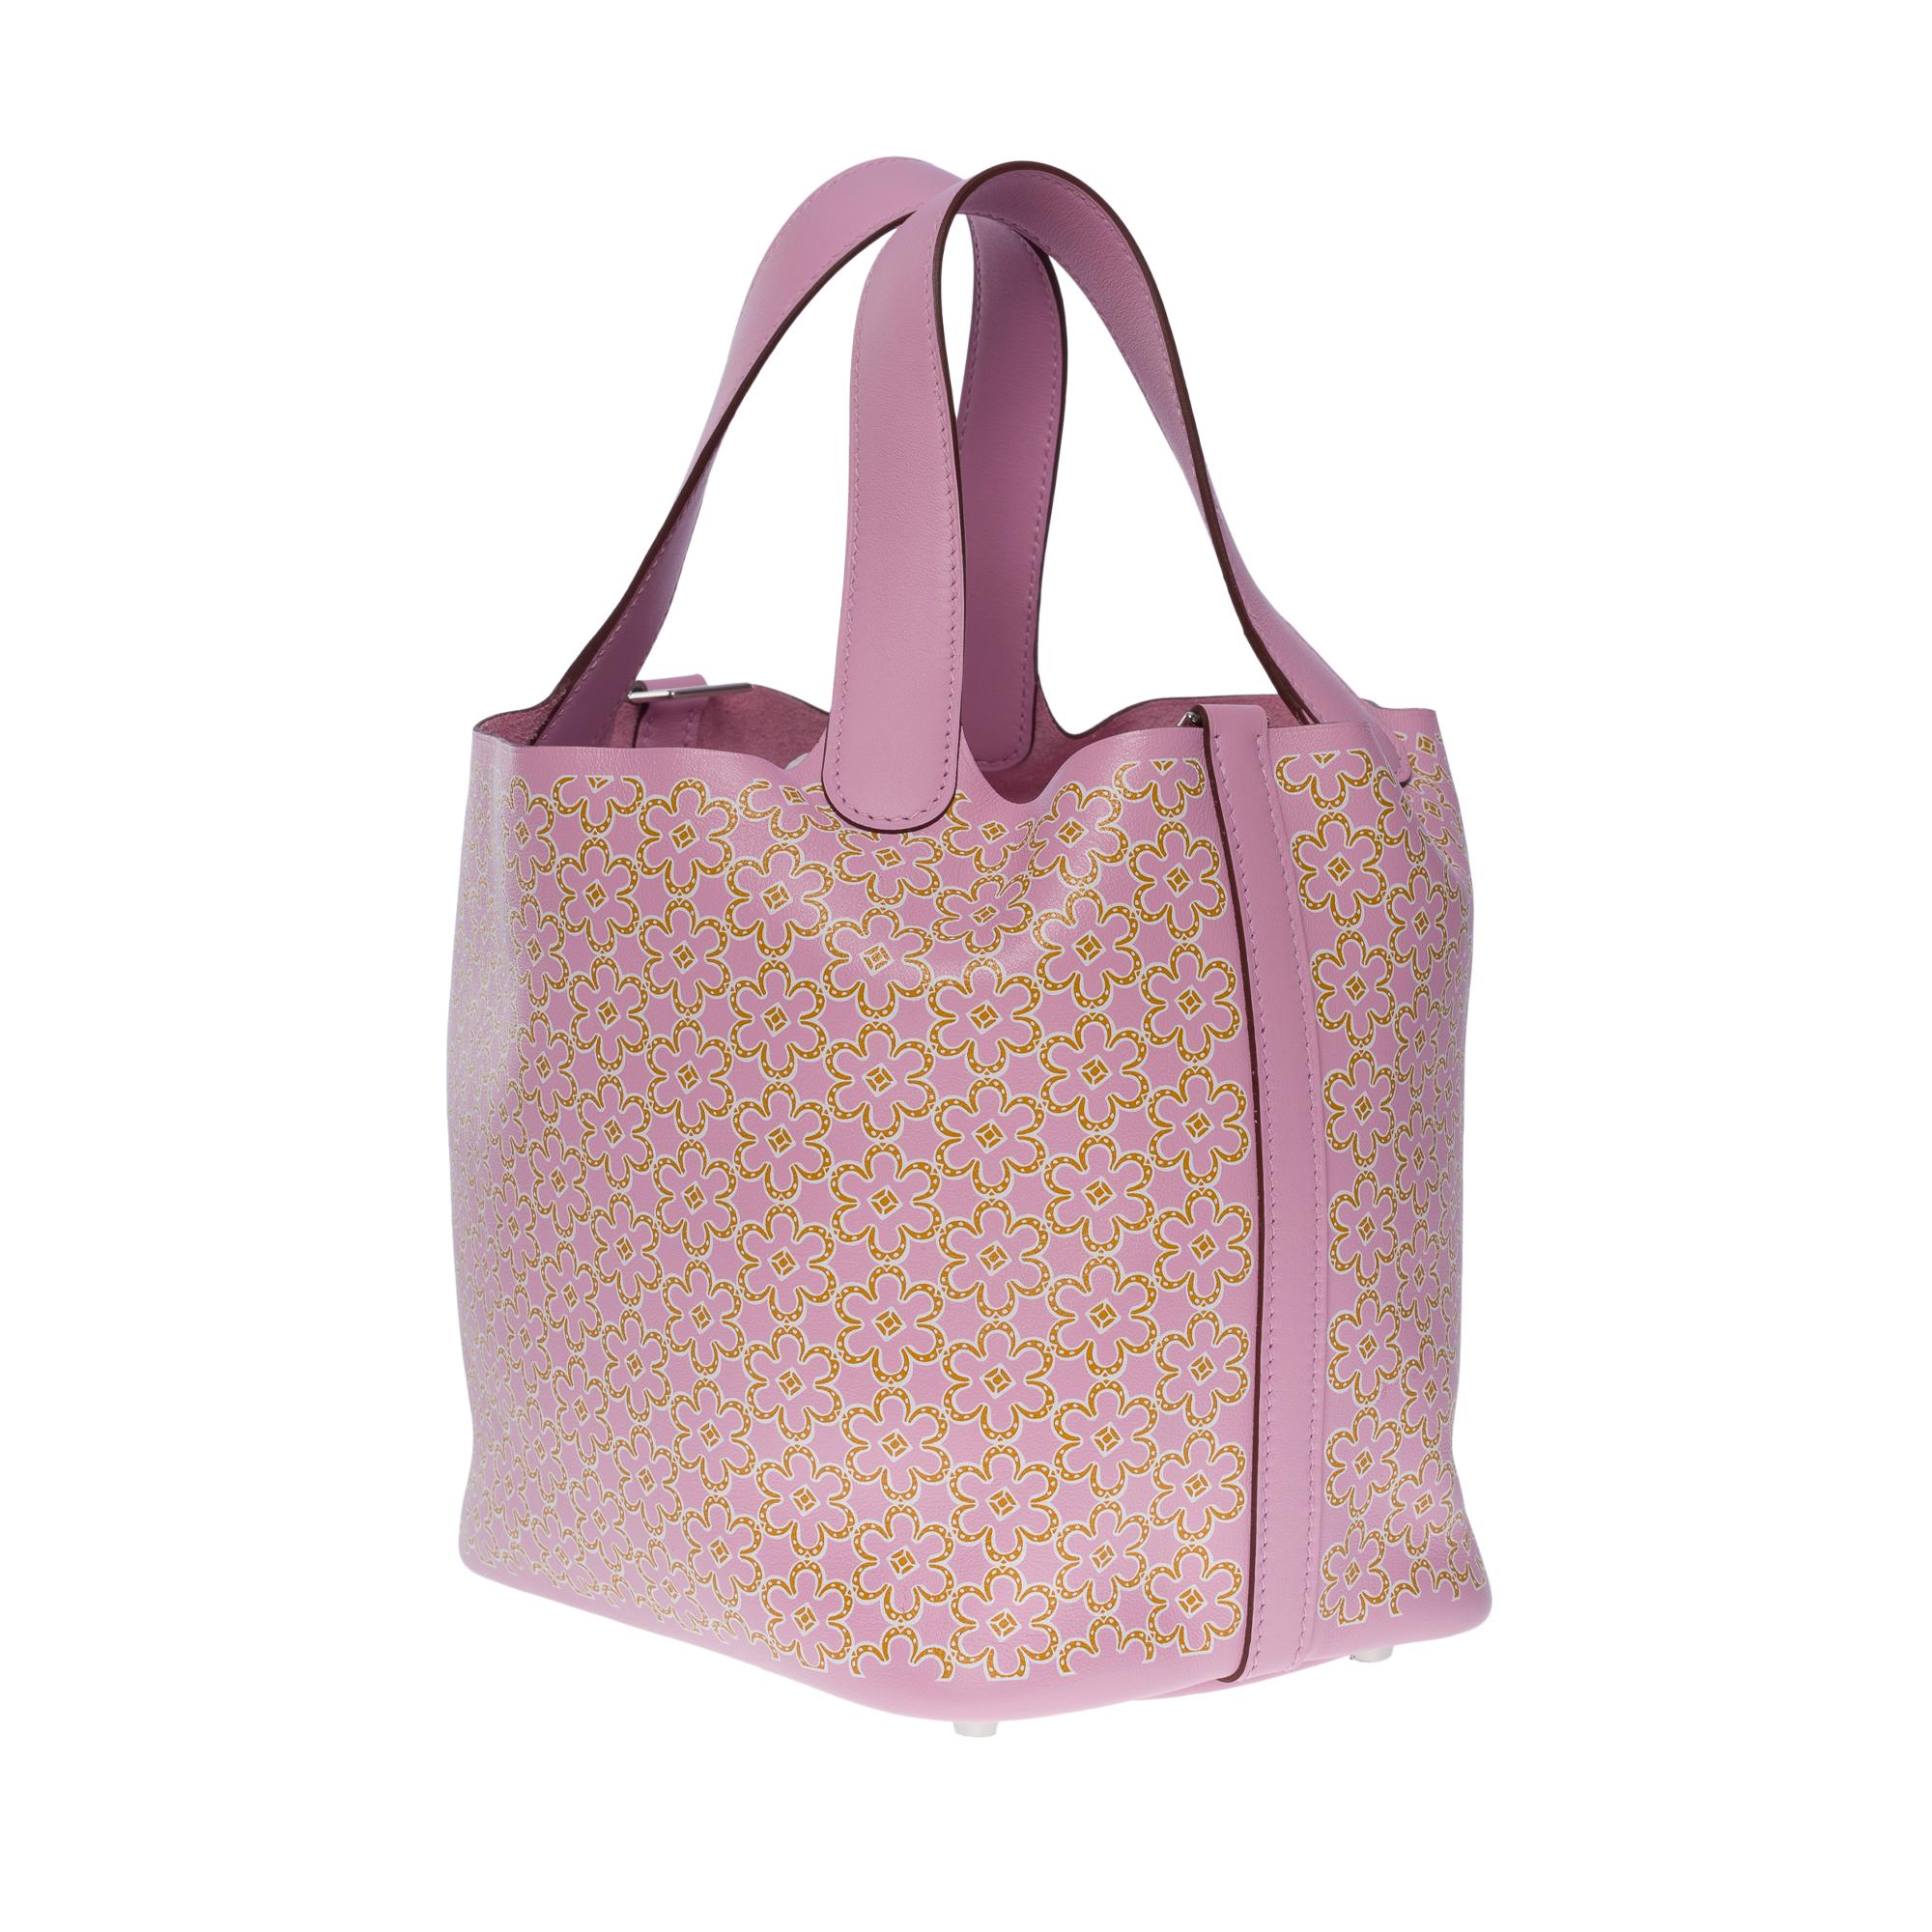 New Hermès Picotin 18 Lucky Daisy limited edition in Mauve Sylvestre Swift, SHW For Sale 1